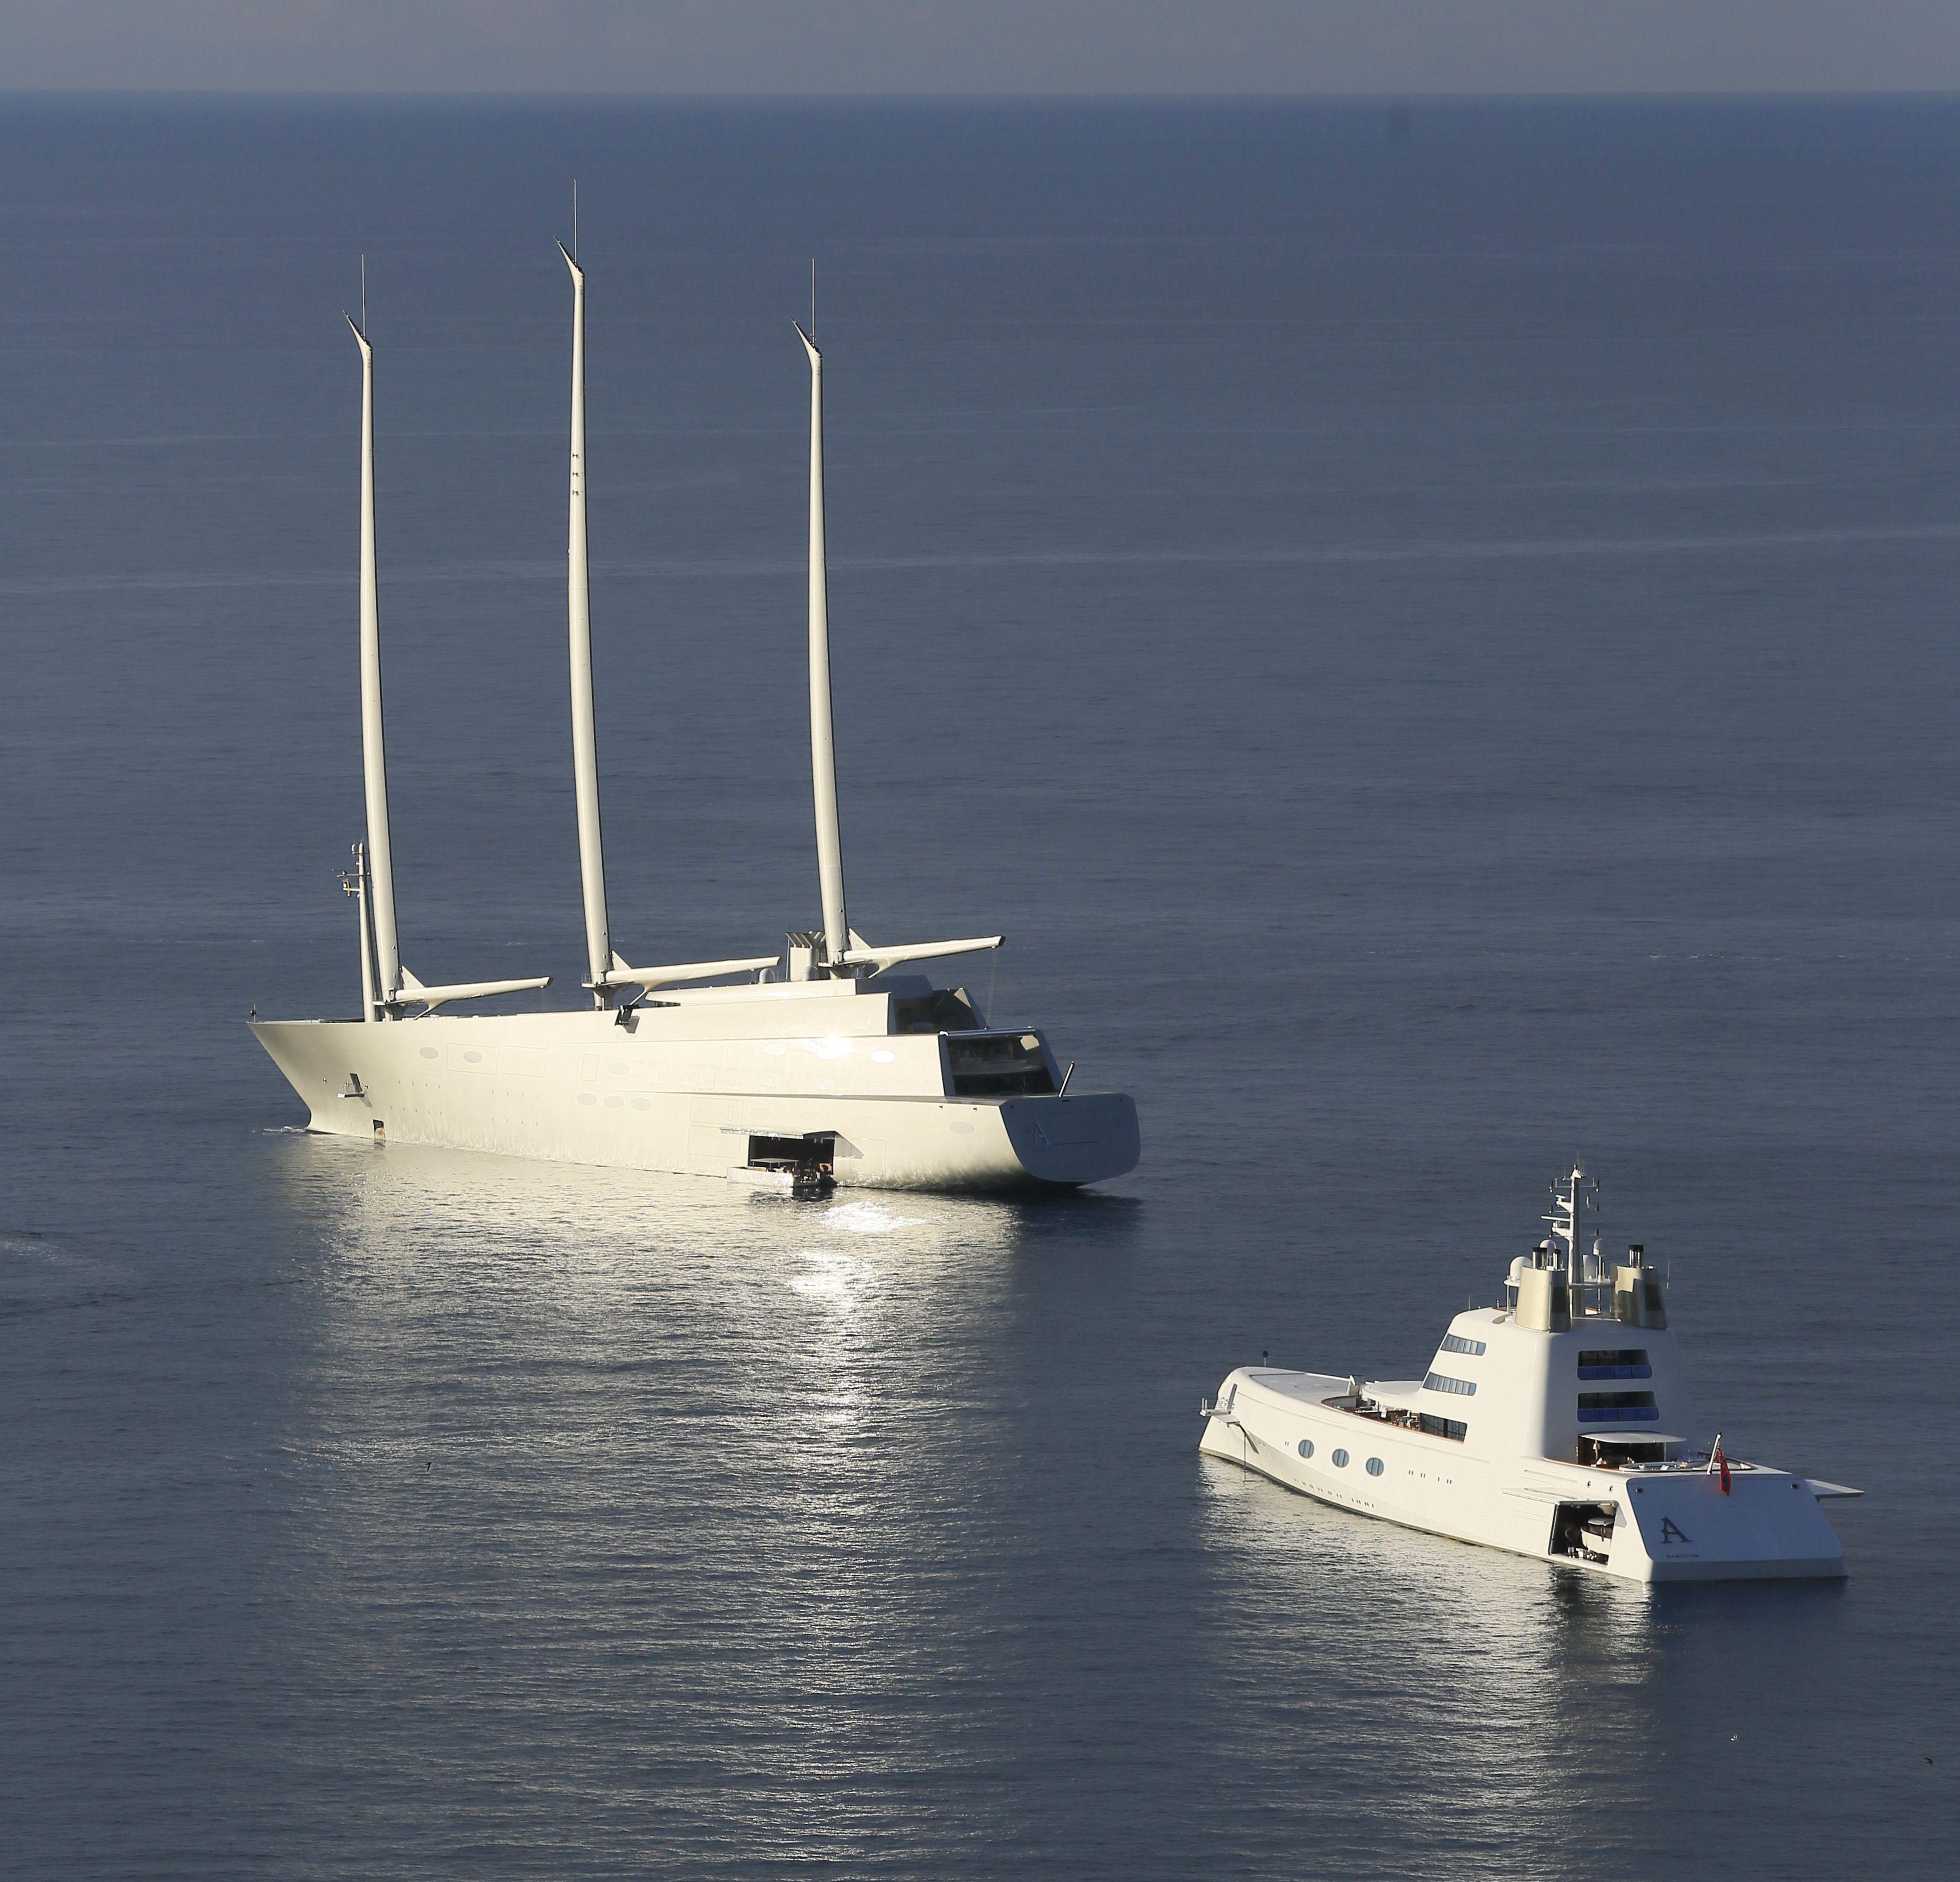 Who owns the world's largest sailing yacht?